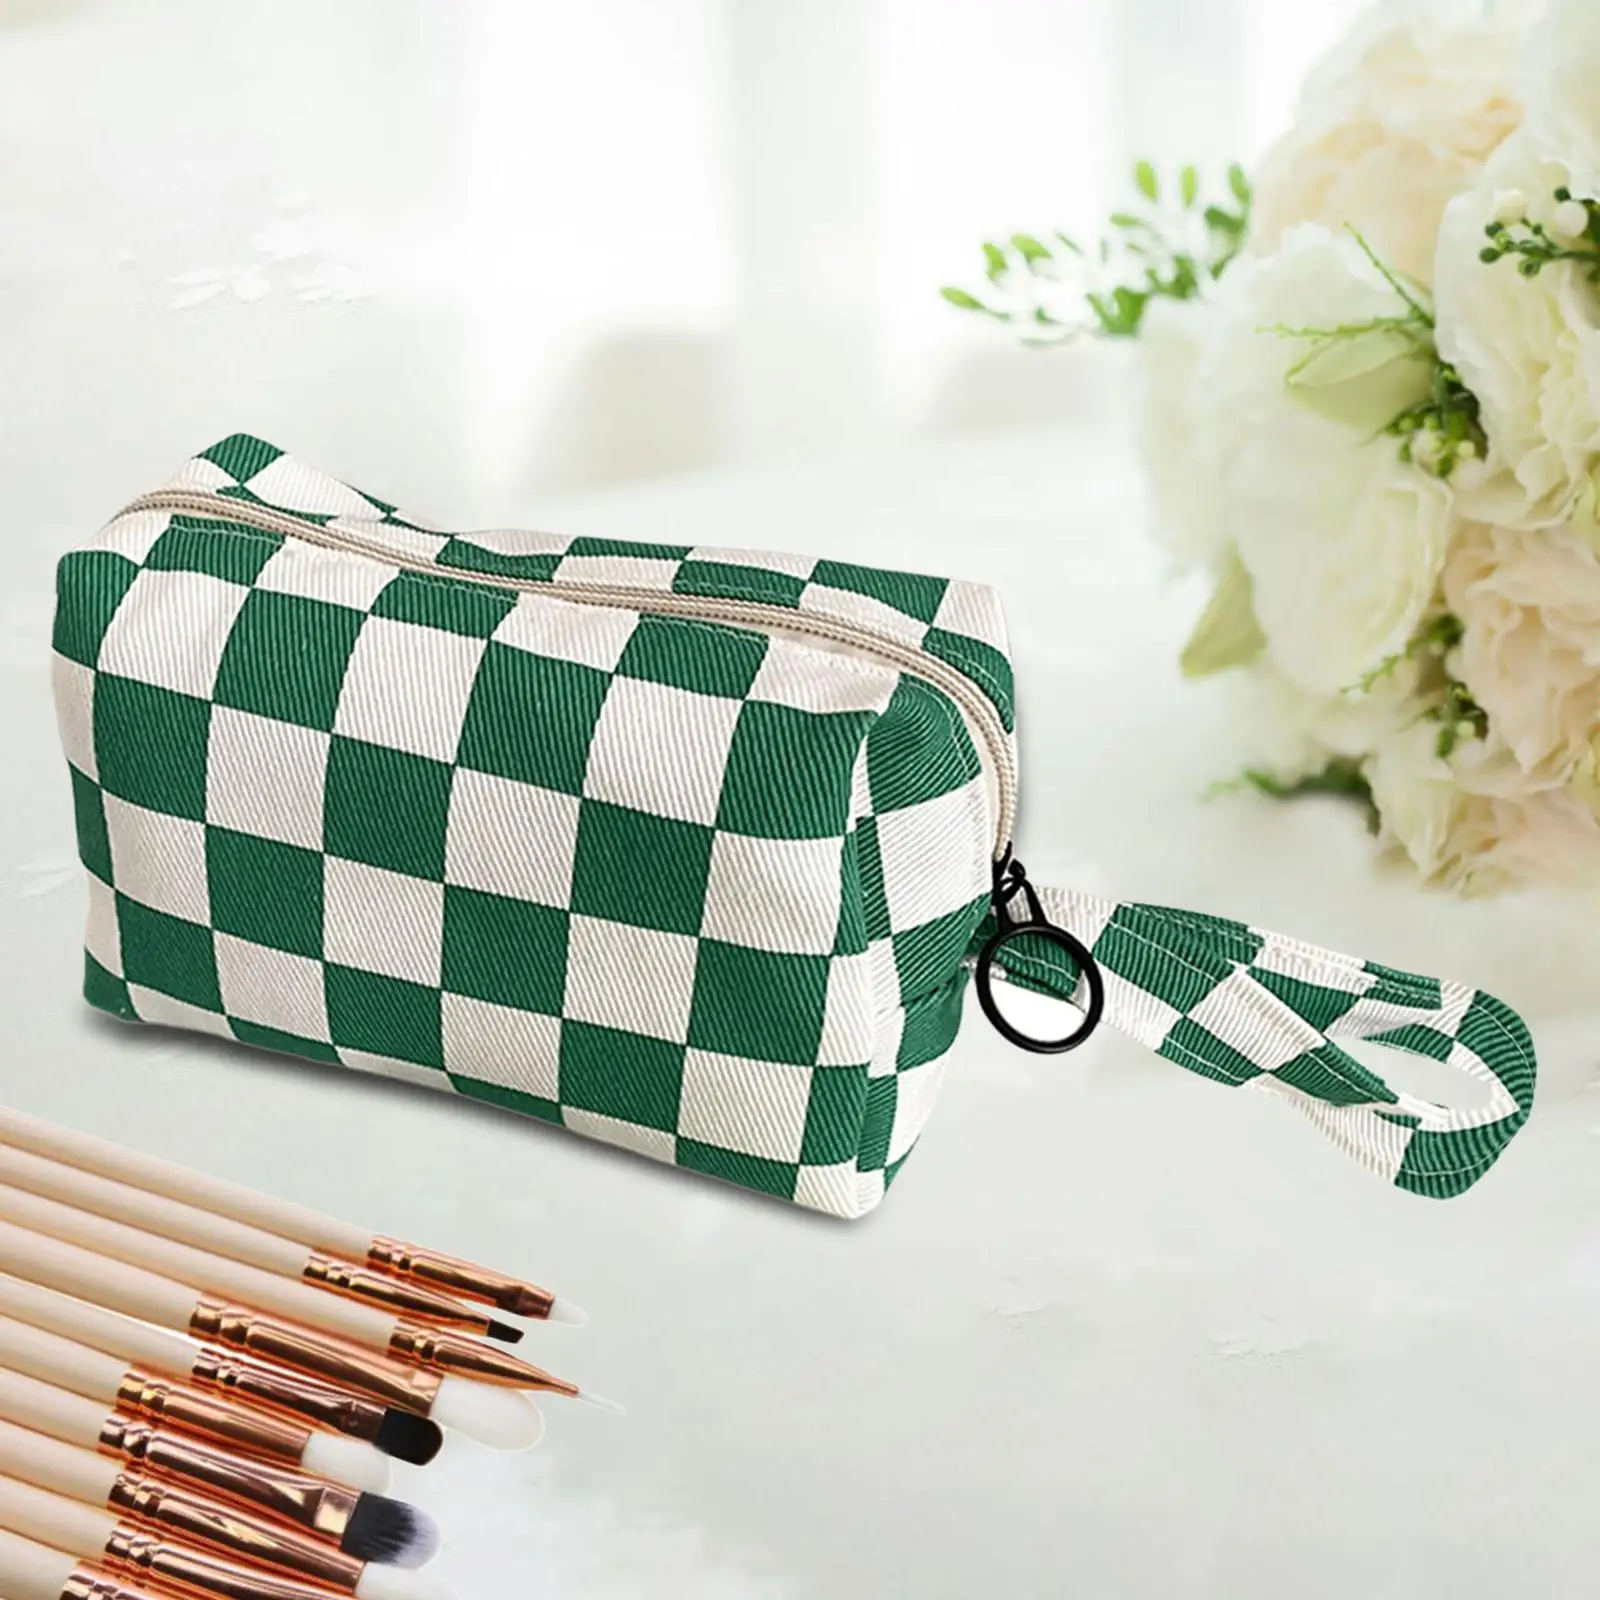 Makeup Bag Zipper Design with Handle Strap for Women and Girls Storage Case